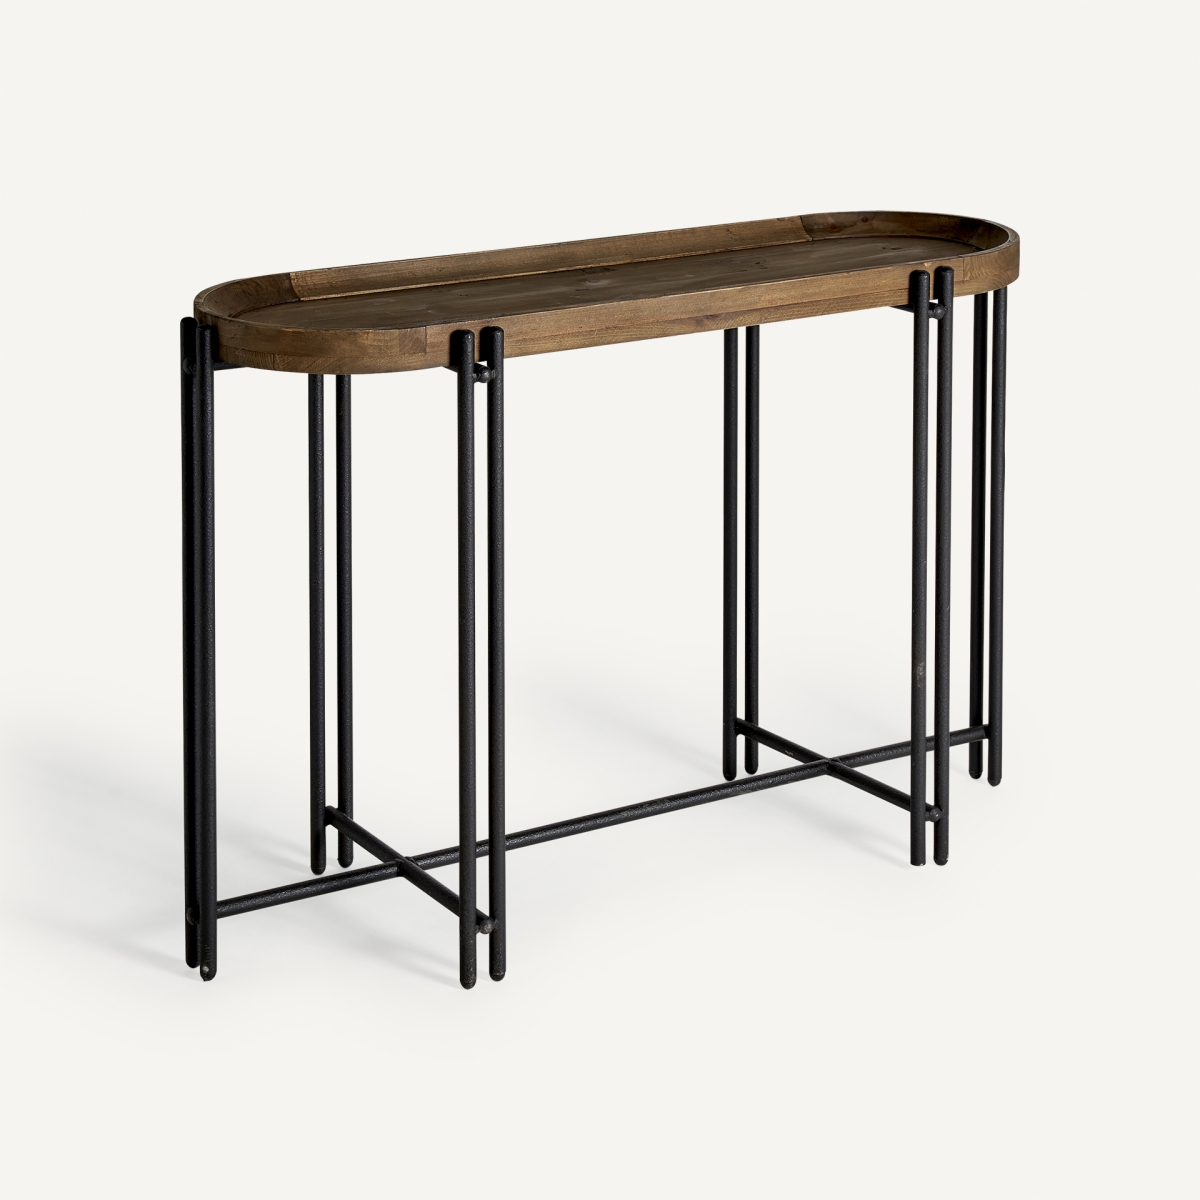 MINOT CONSOLE TABLE